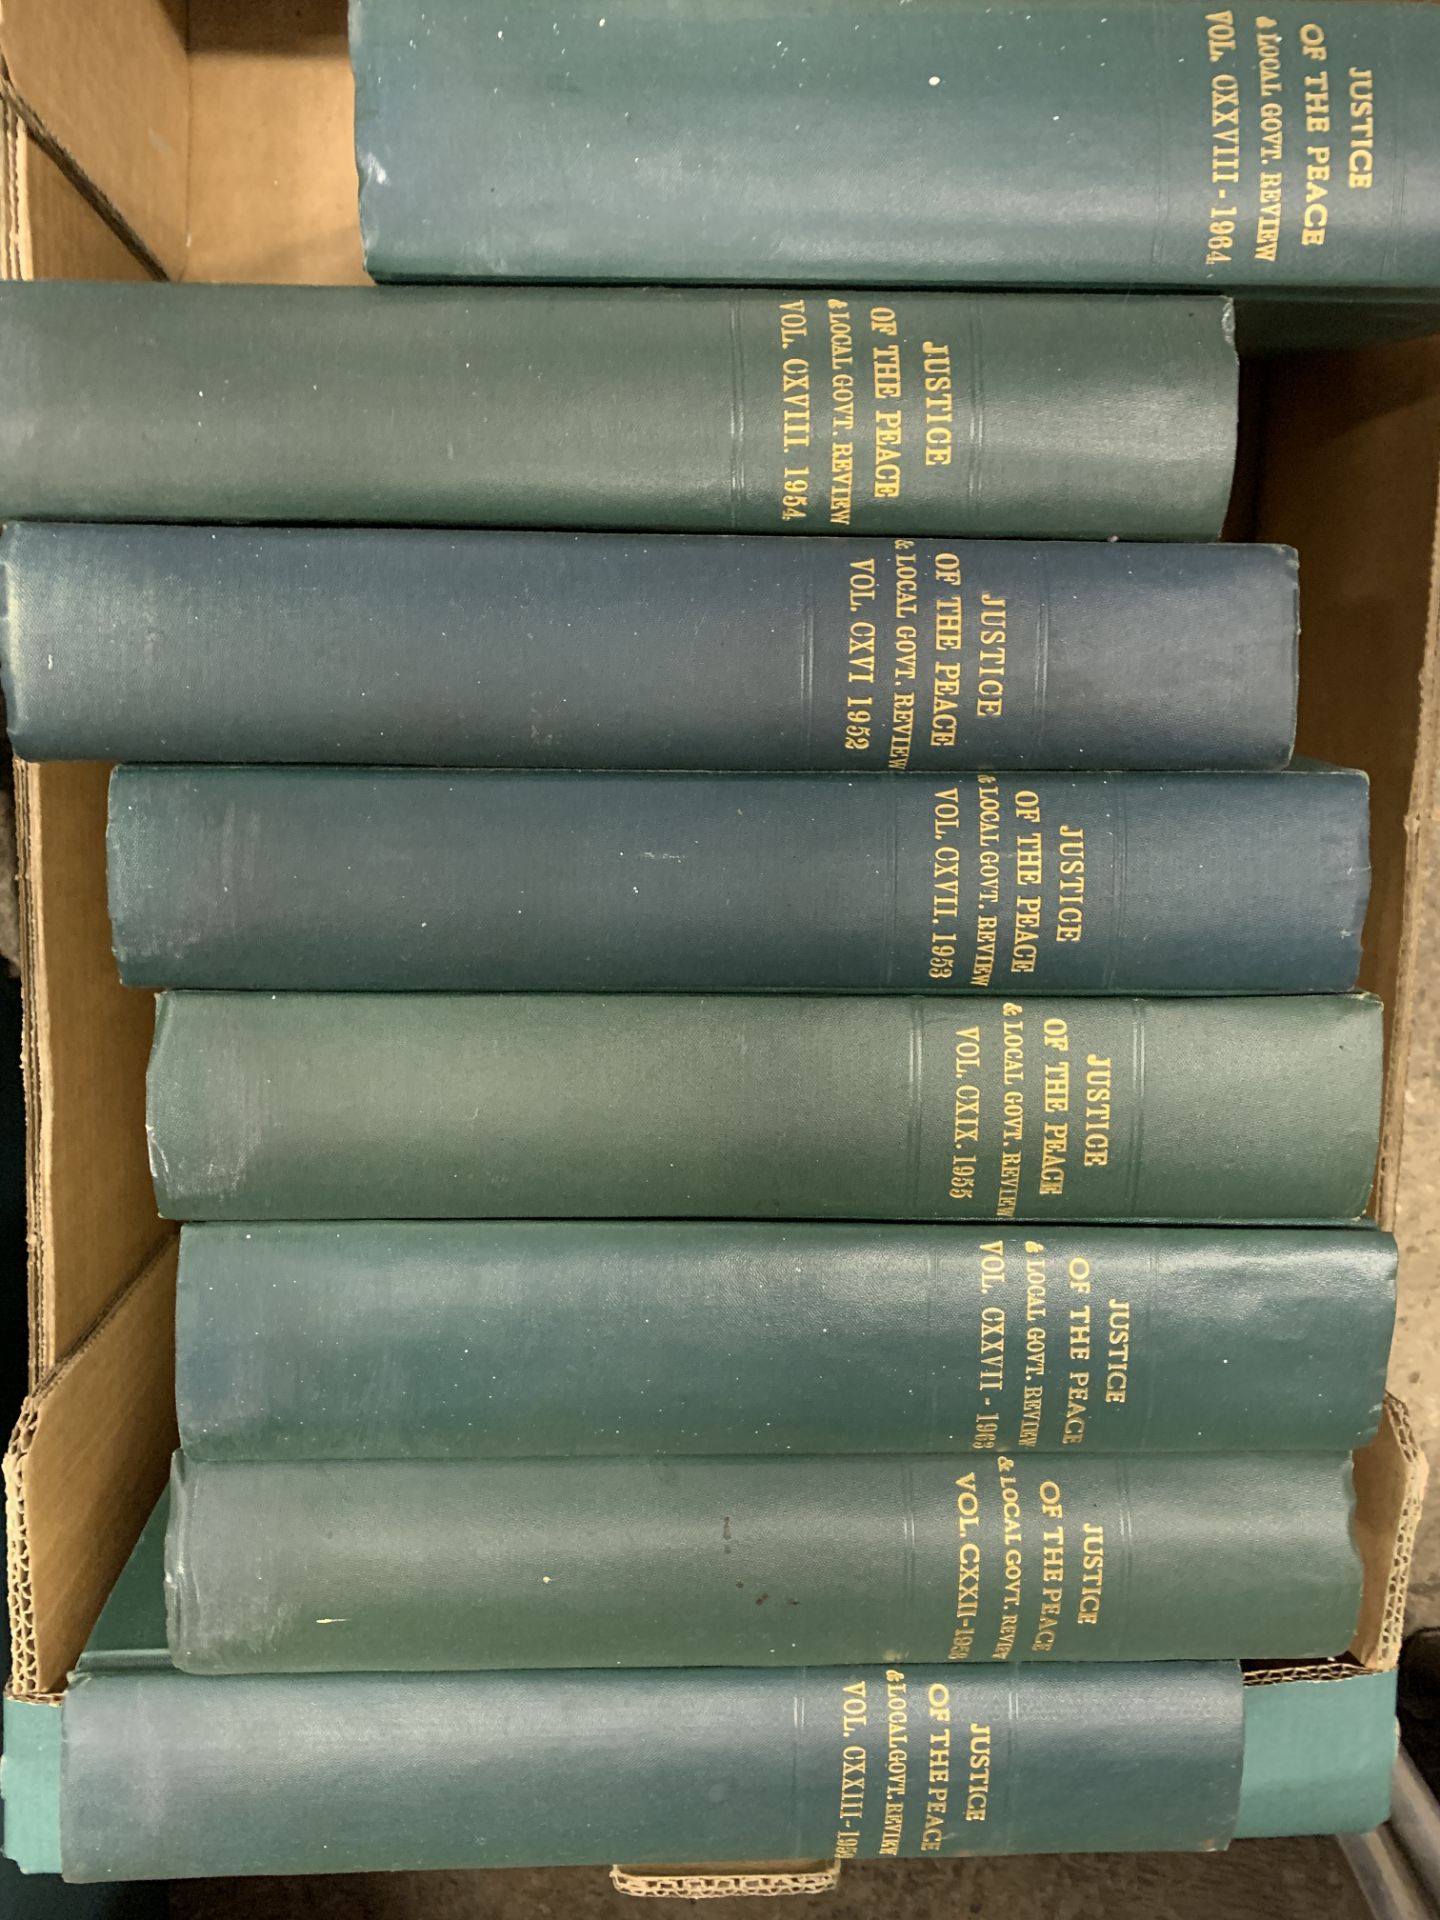 17 volumes of Justice of the Peace.